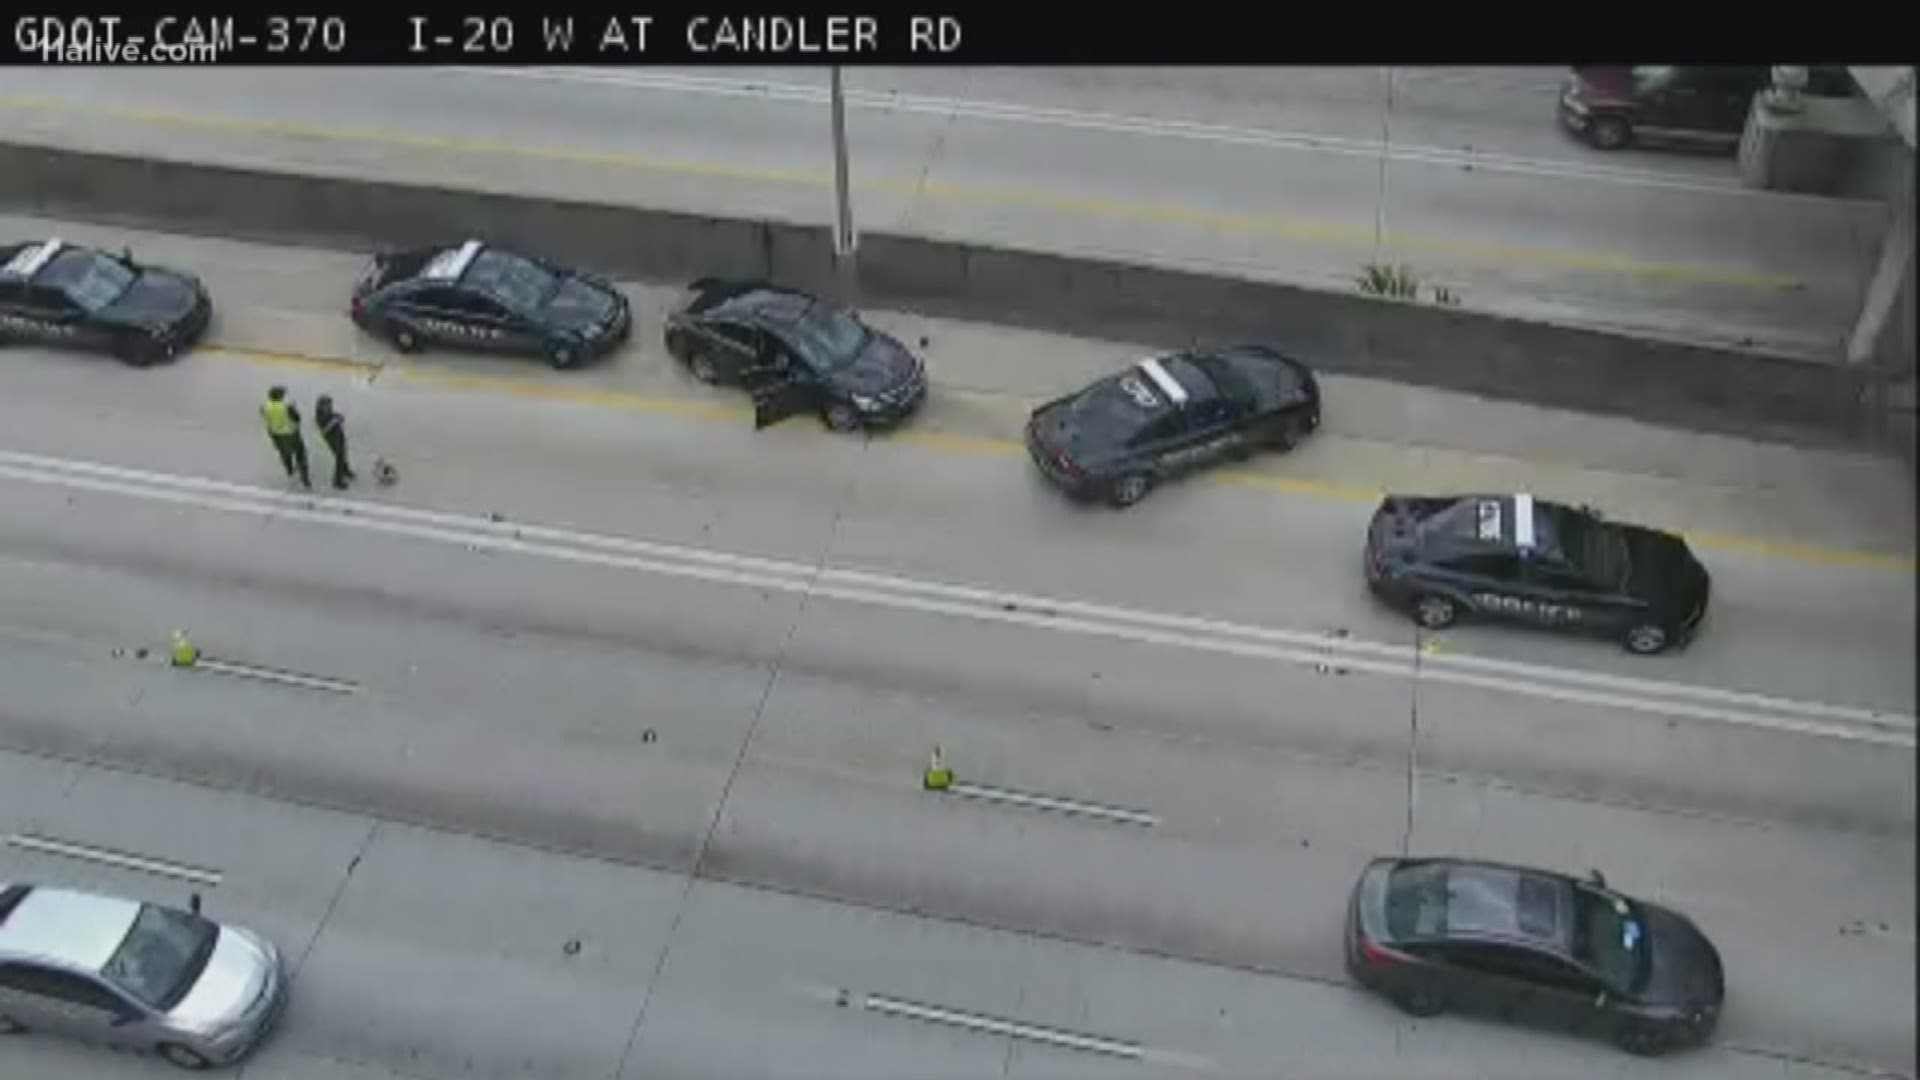 Incident happened just at Candler Road in DeKalb County.